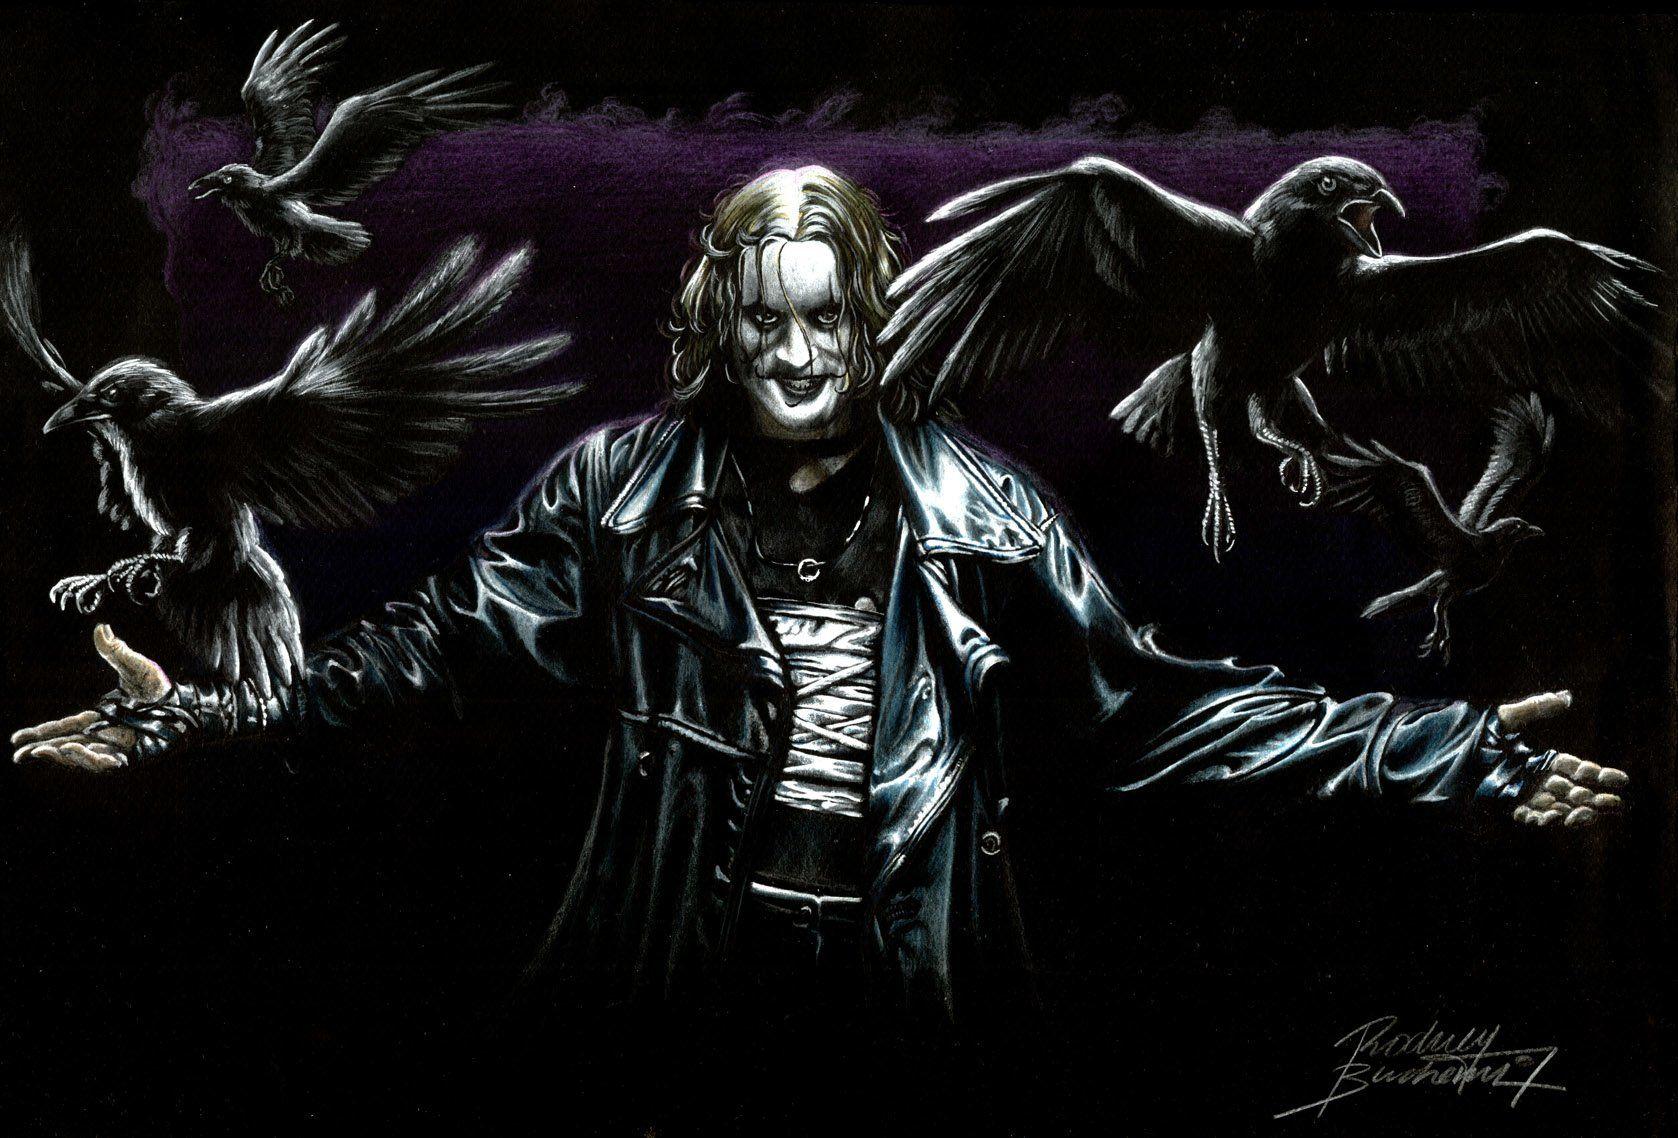 The Crow Wallpapers - Wallpaper Cave